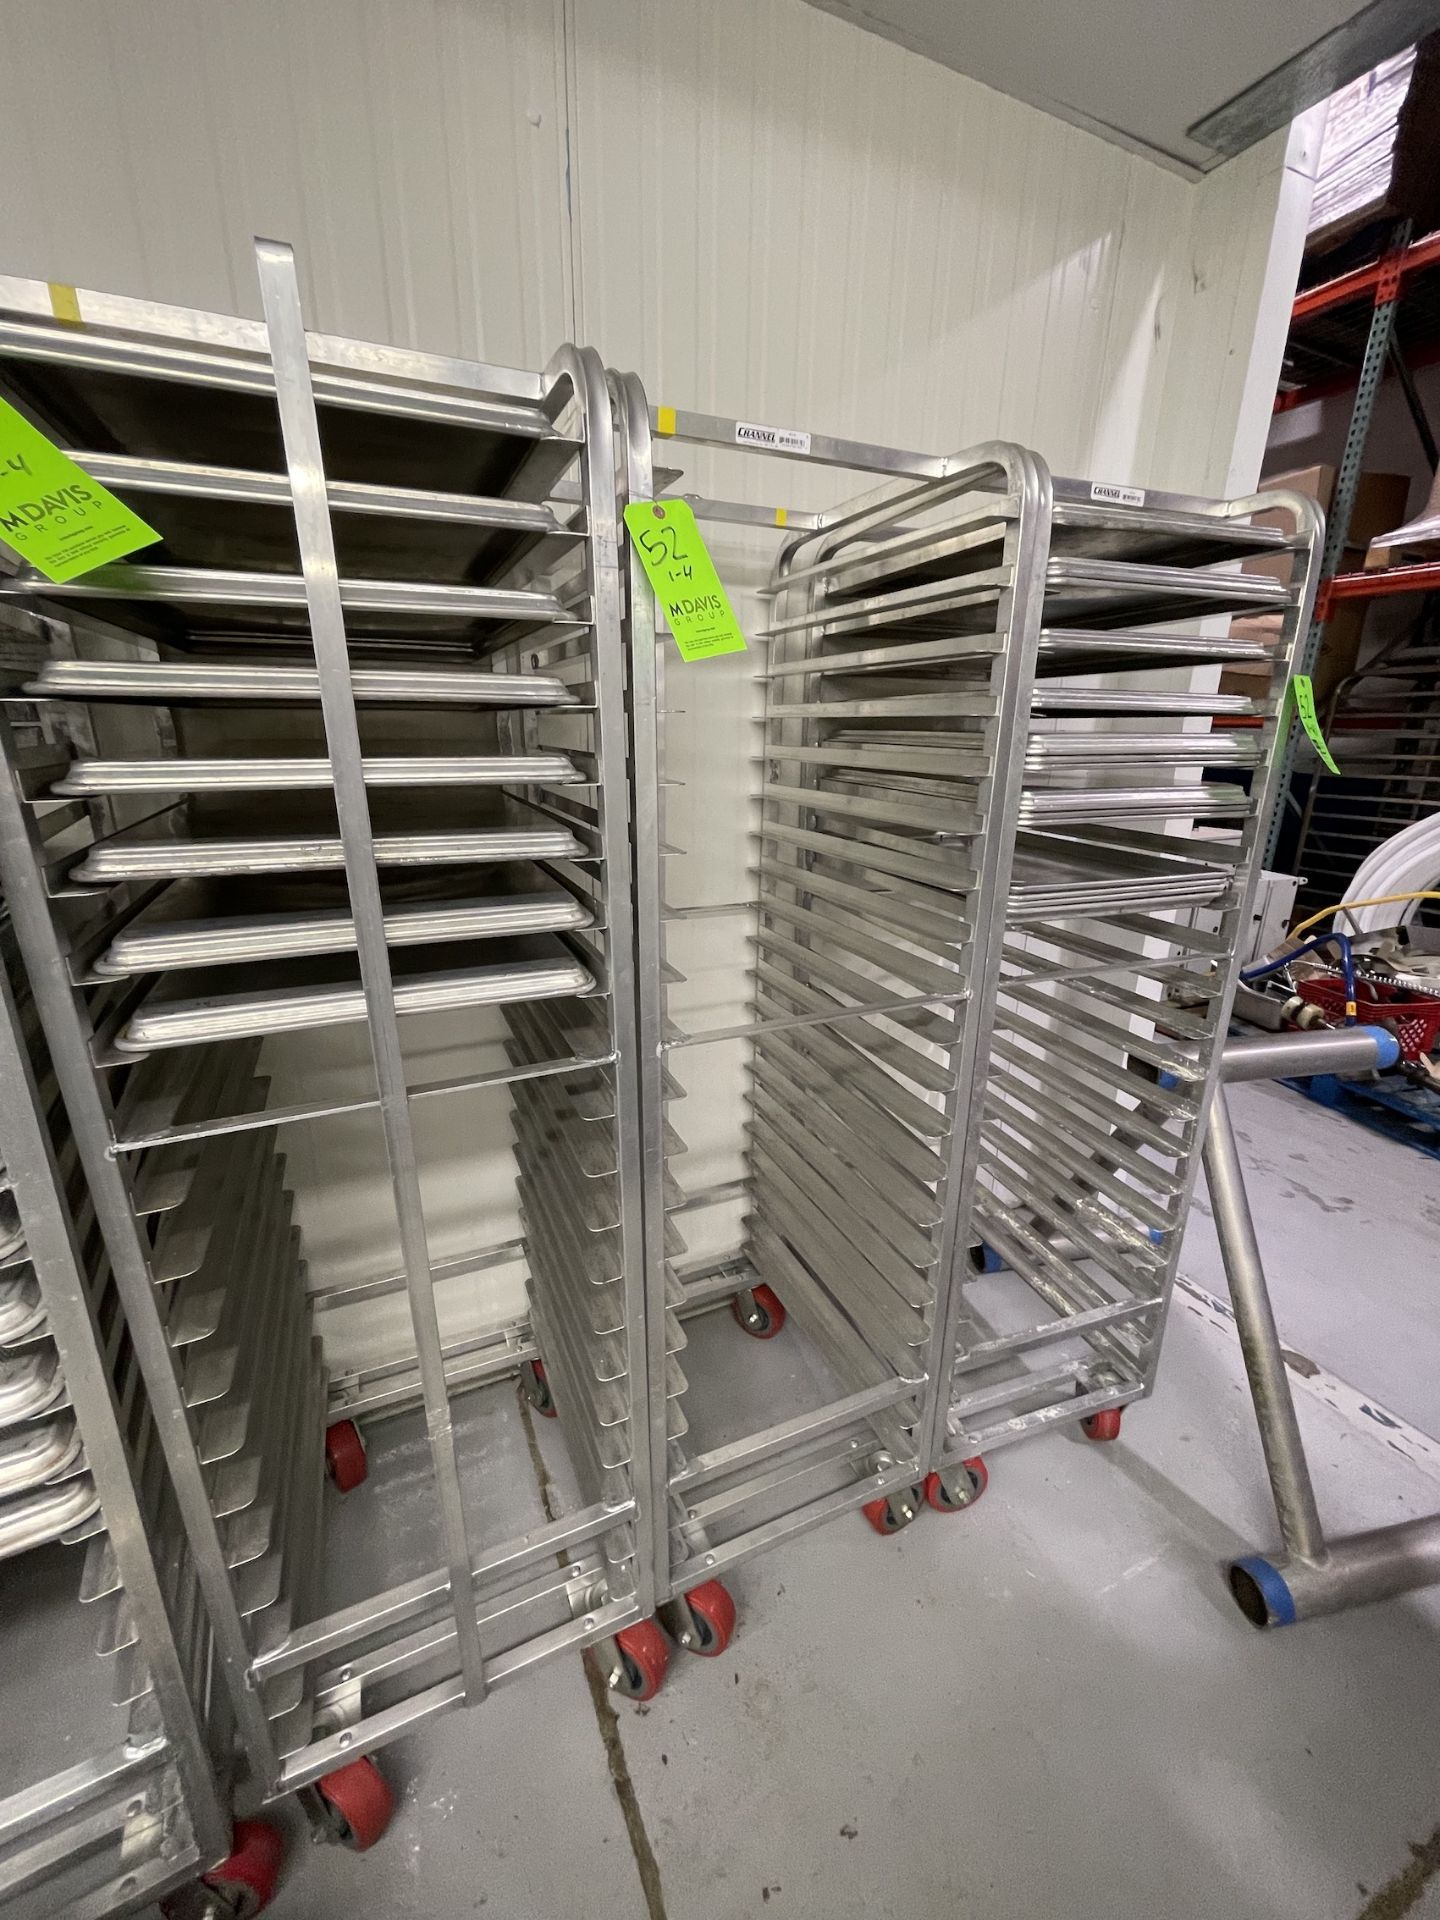 (4) CHANNEL ALUMINUM BAKING PAN RACK, MODEL 401A, INCLUDES APPROX. (30) BAKING SHEET PANS, MIX OF - Image 3 of 3